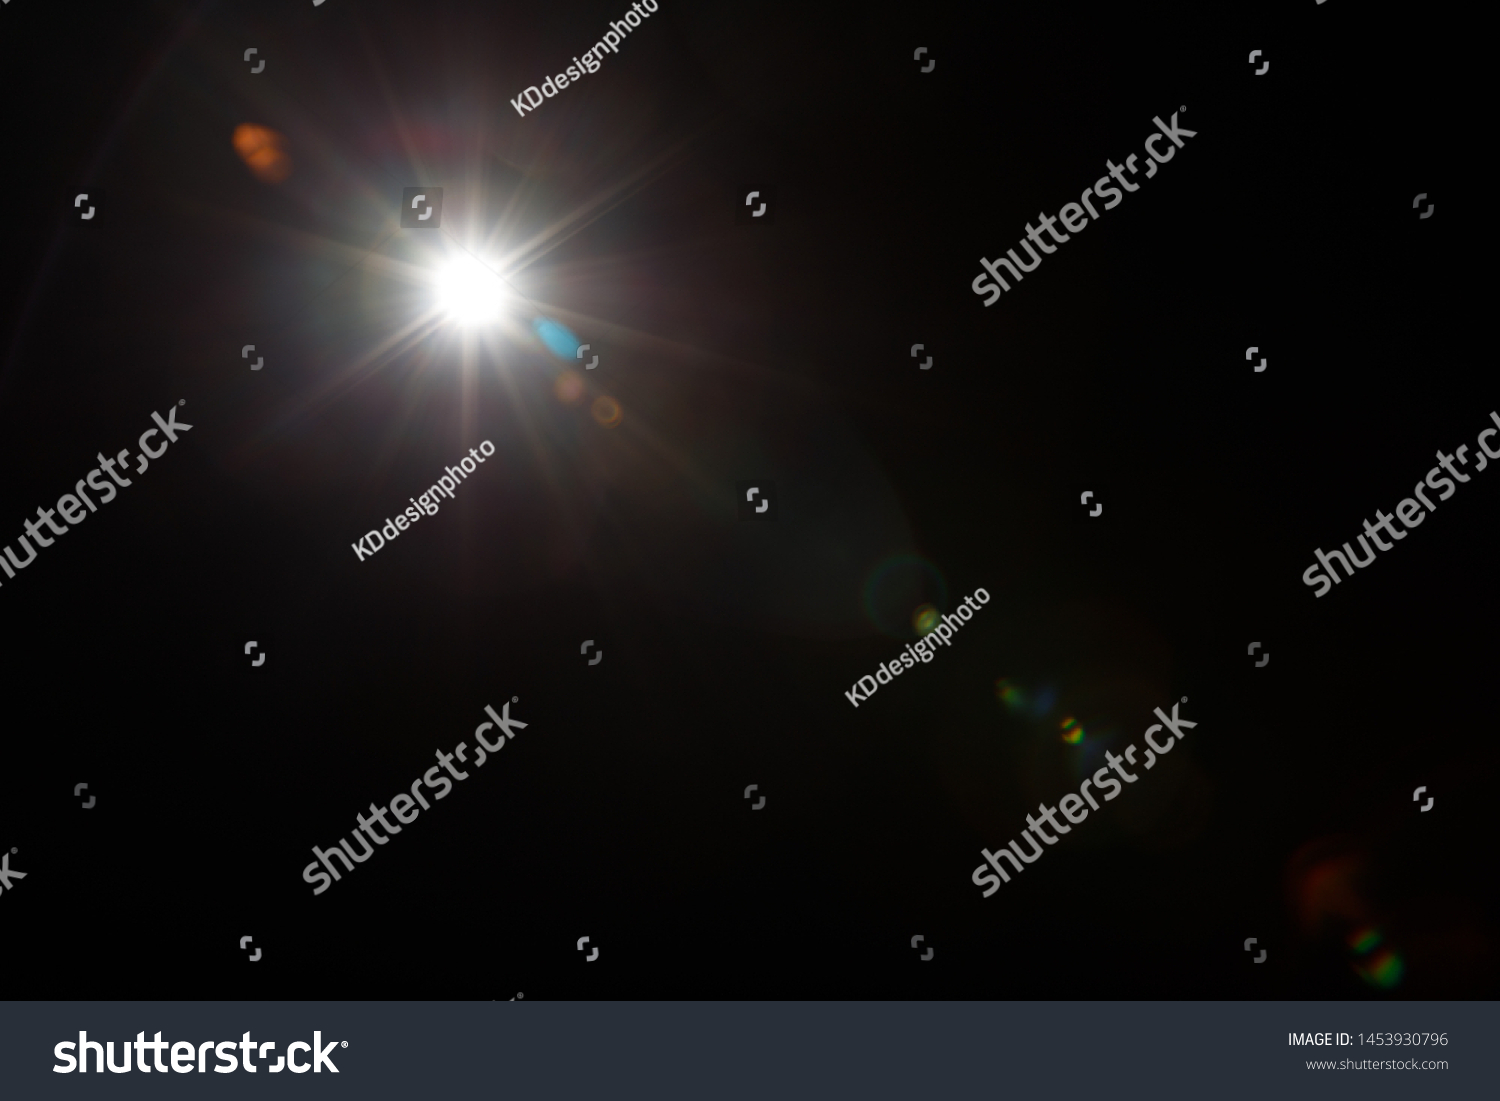 Lens Flare. Light over black background. Easy to add overlay or screen filter over photos. Abstract sun burst with digital lens flare background. Gleams rounded and hexagonal shapes, rainbow halo. #1453930796